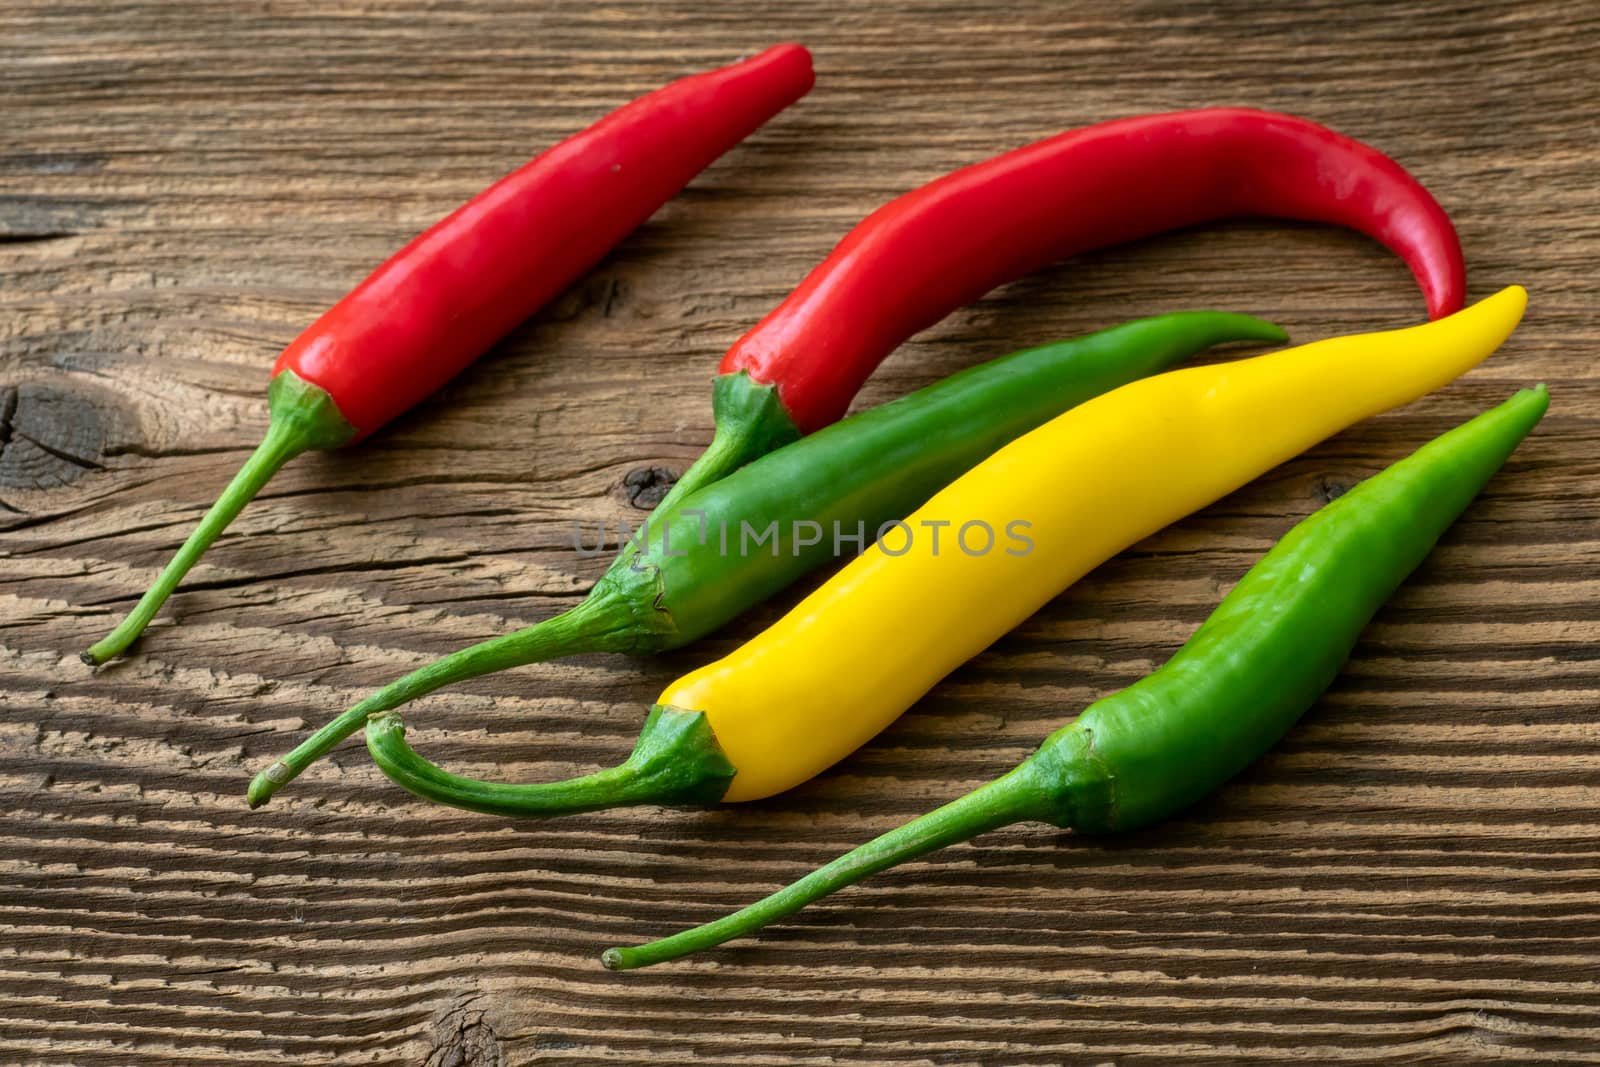 Spicy chilies peppers on wooden background. Colorful peppers on rustic wooden table. Raw healthy food.